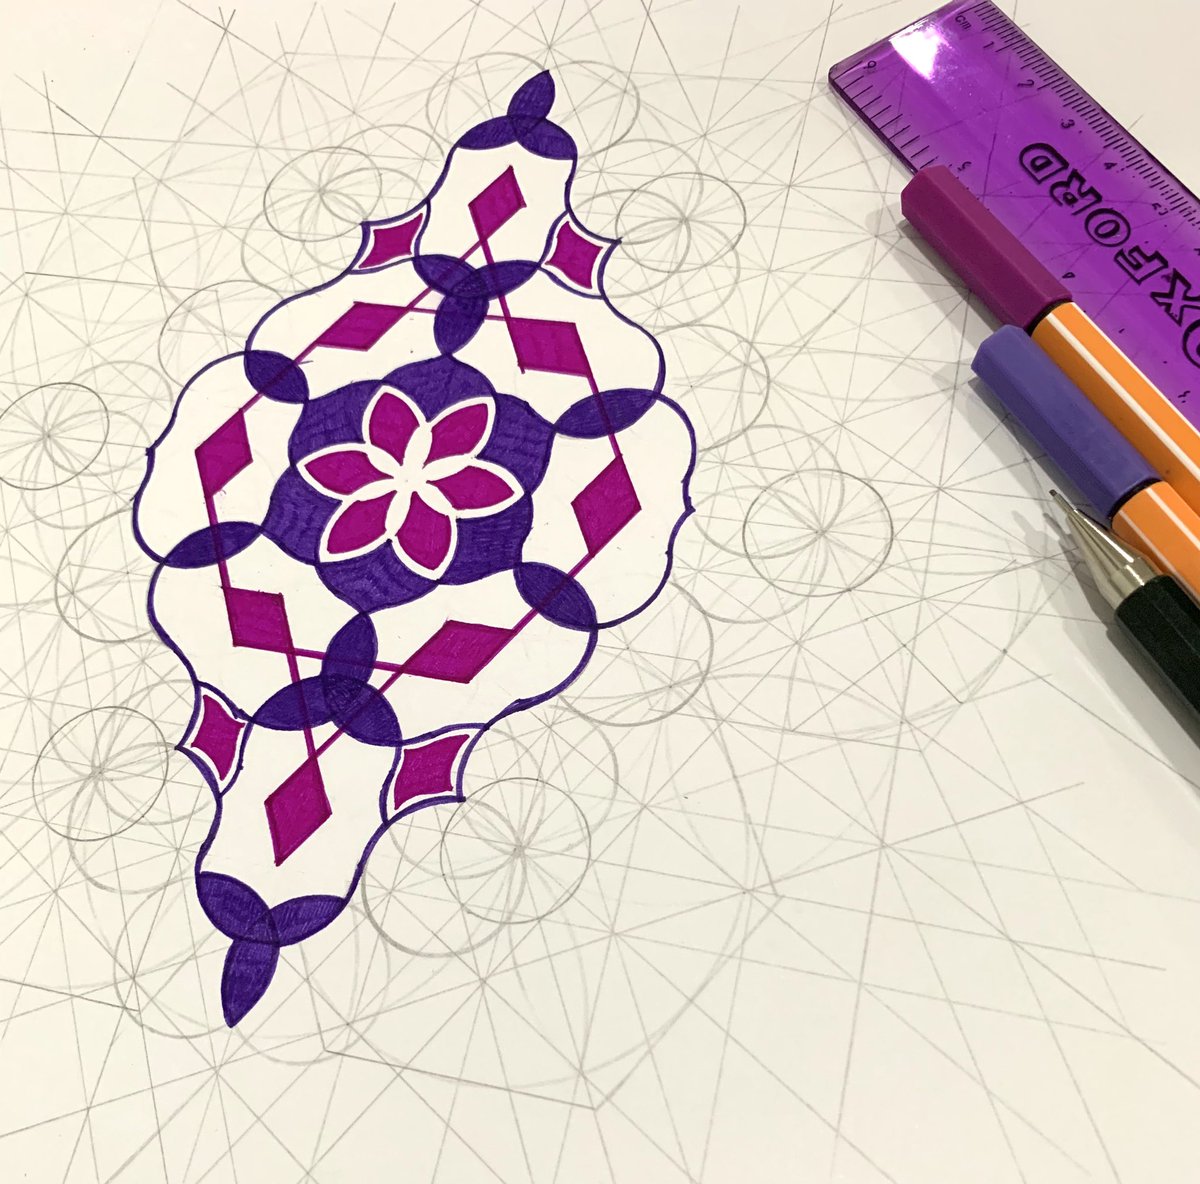 A bit more ambitious for Day 20 of  #GeometricJuly  @c0mplexnumber